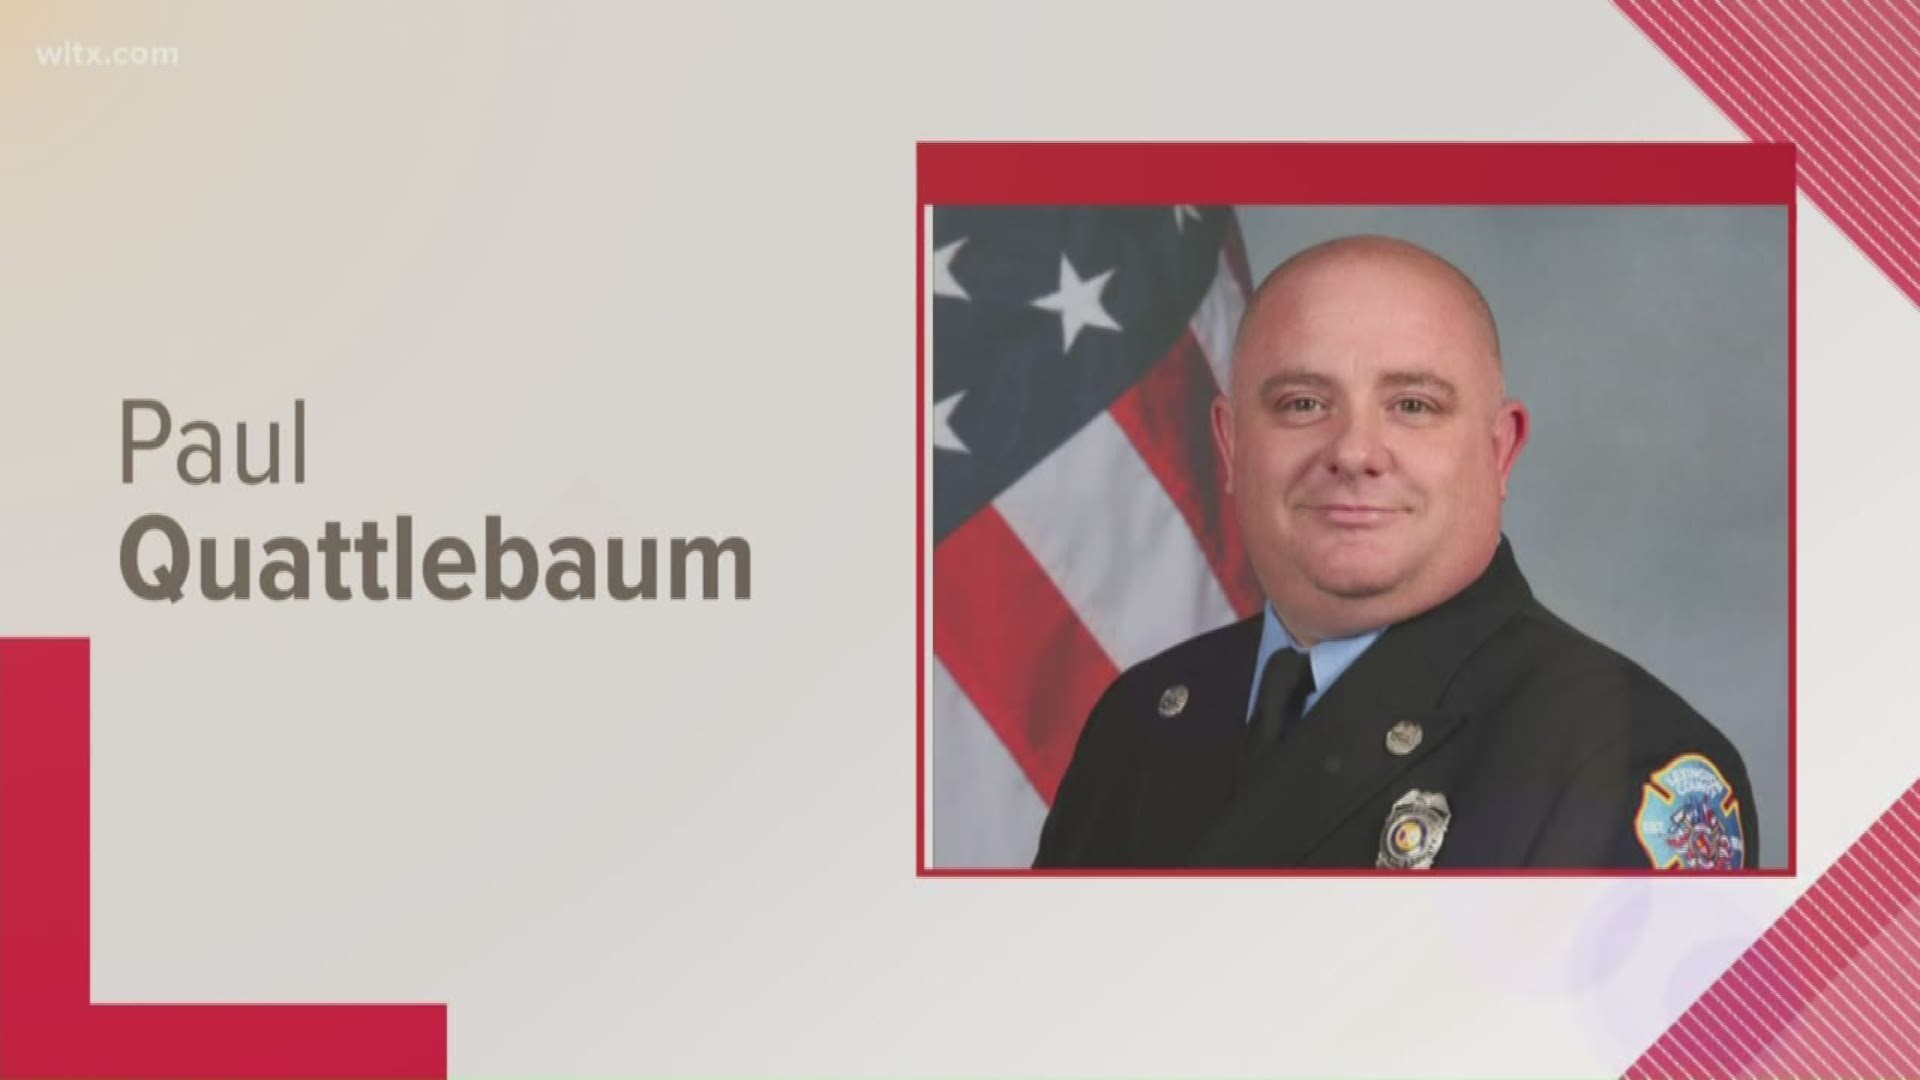 Fire Service Fire Engineer Paul Quattlebaum was fatally struck by a semi-truck while responding to a motor-vehicle collision Friday afternoon.